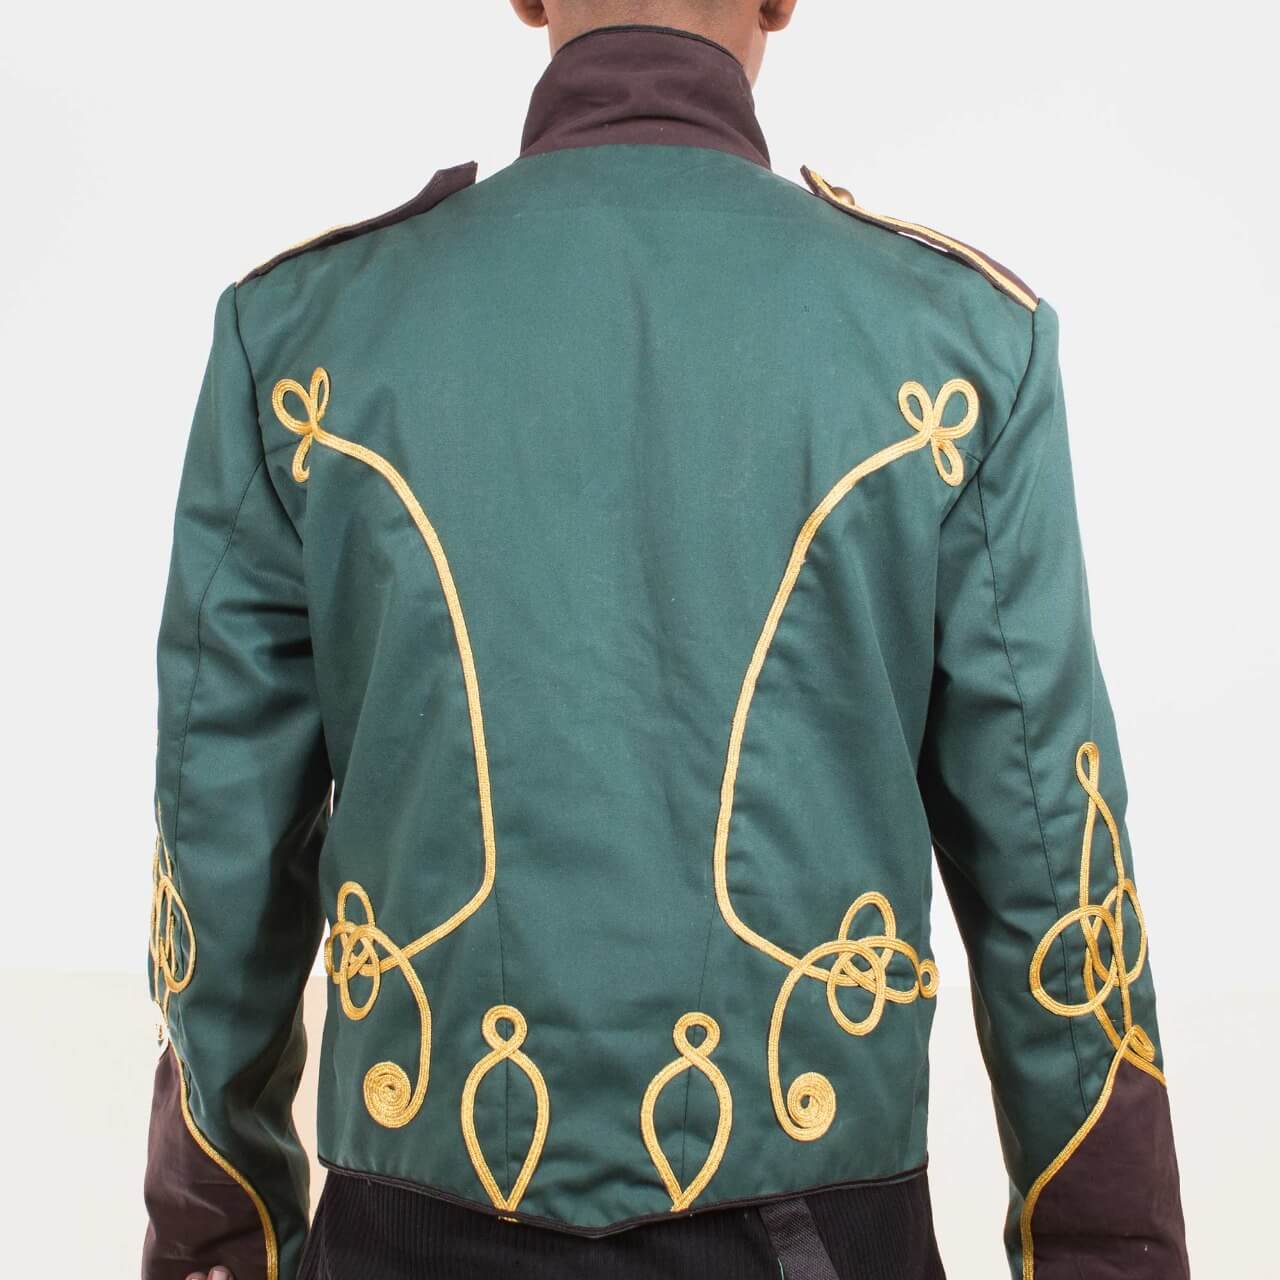 Green Steampunk Military Jacket with gold Braiding Back and front2